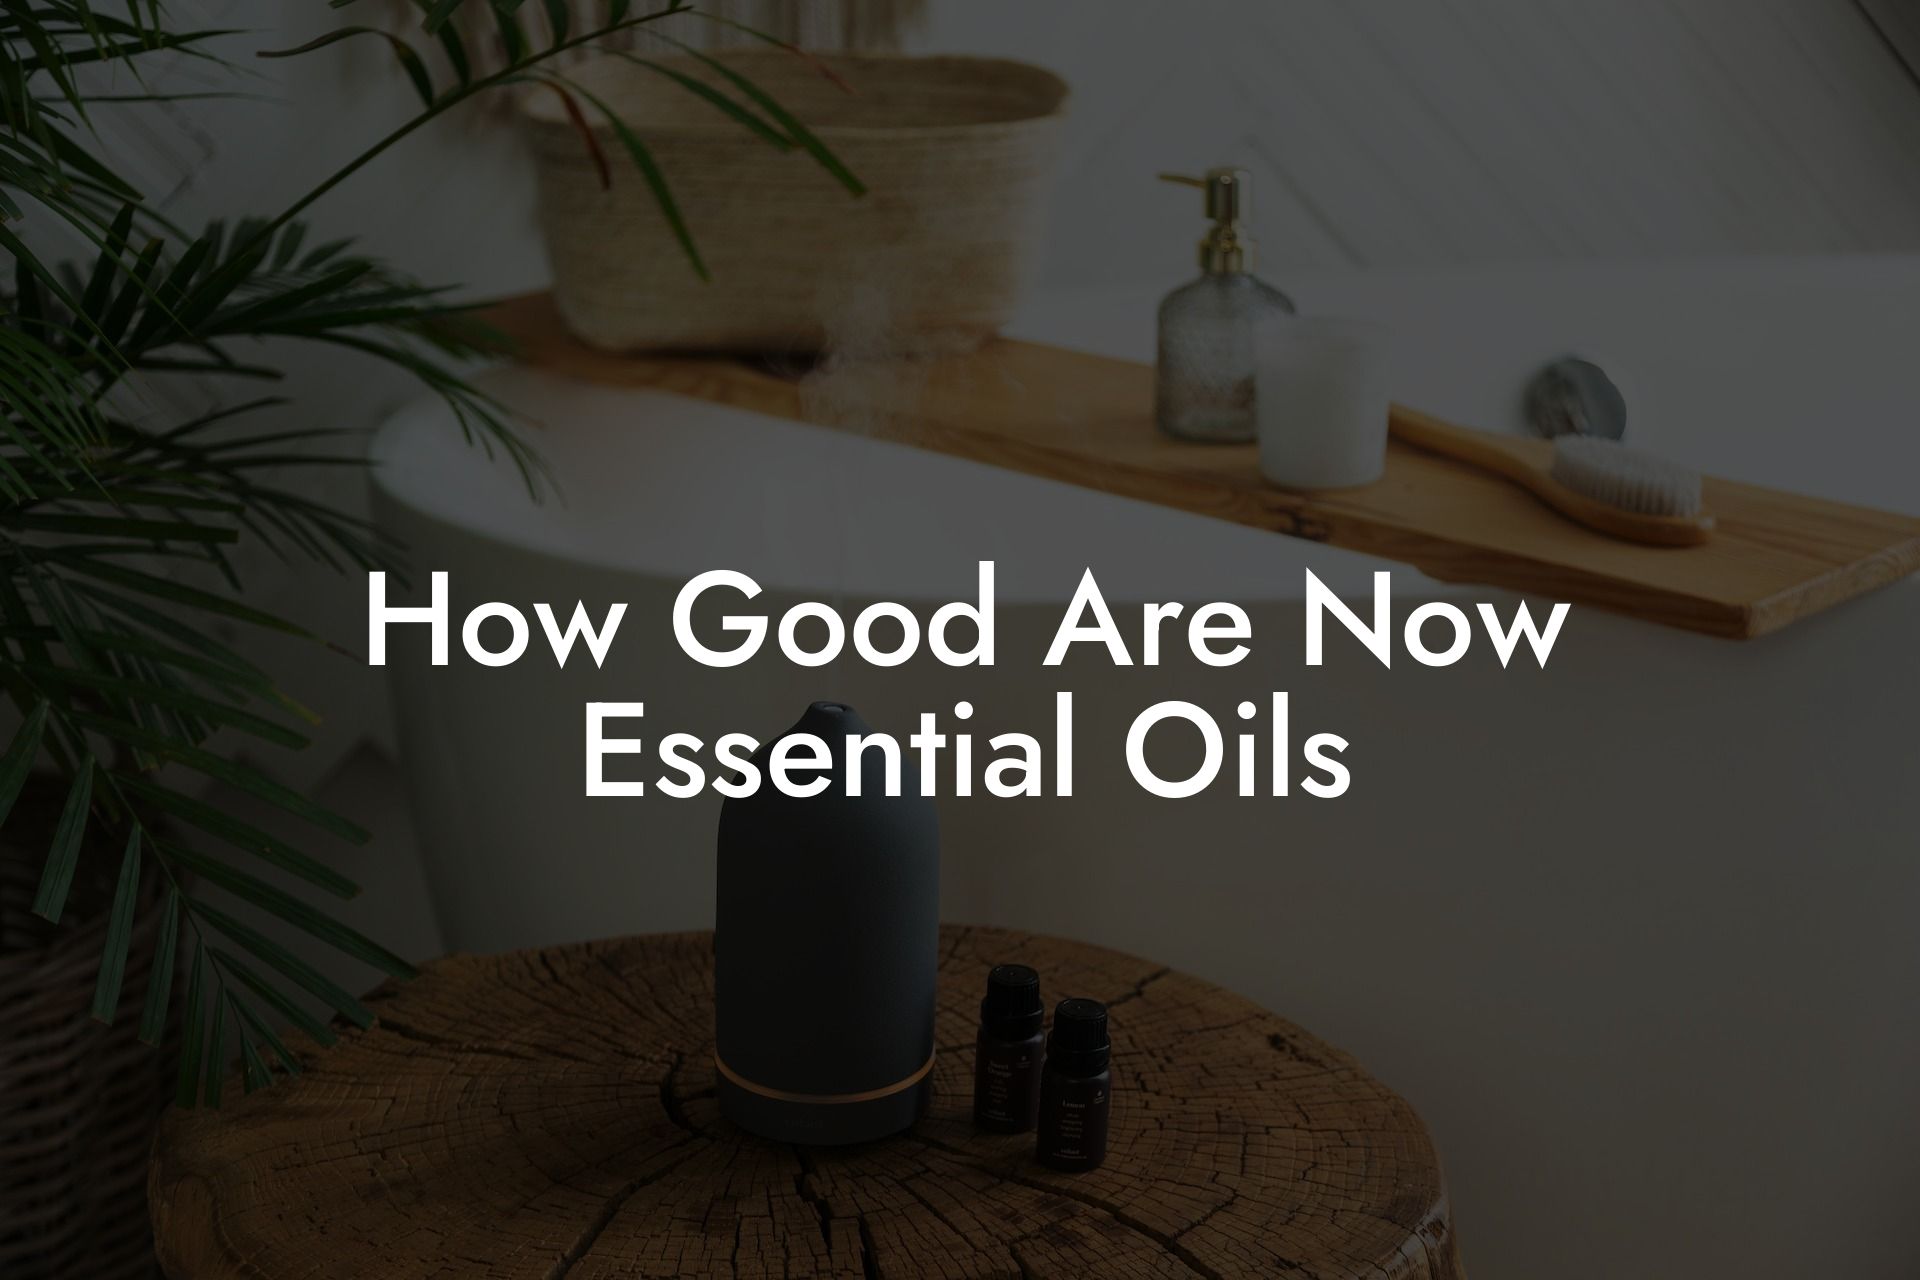 How Good Are Now Essential Oils